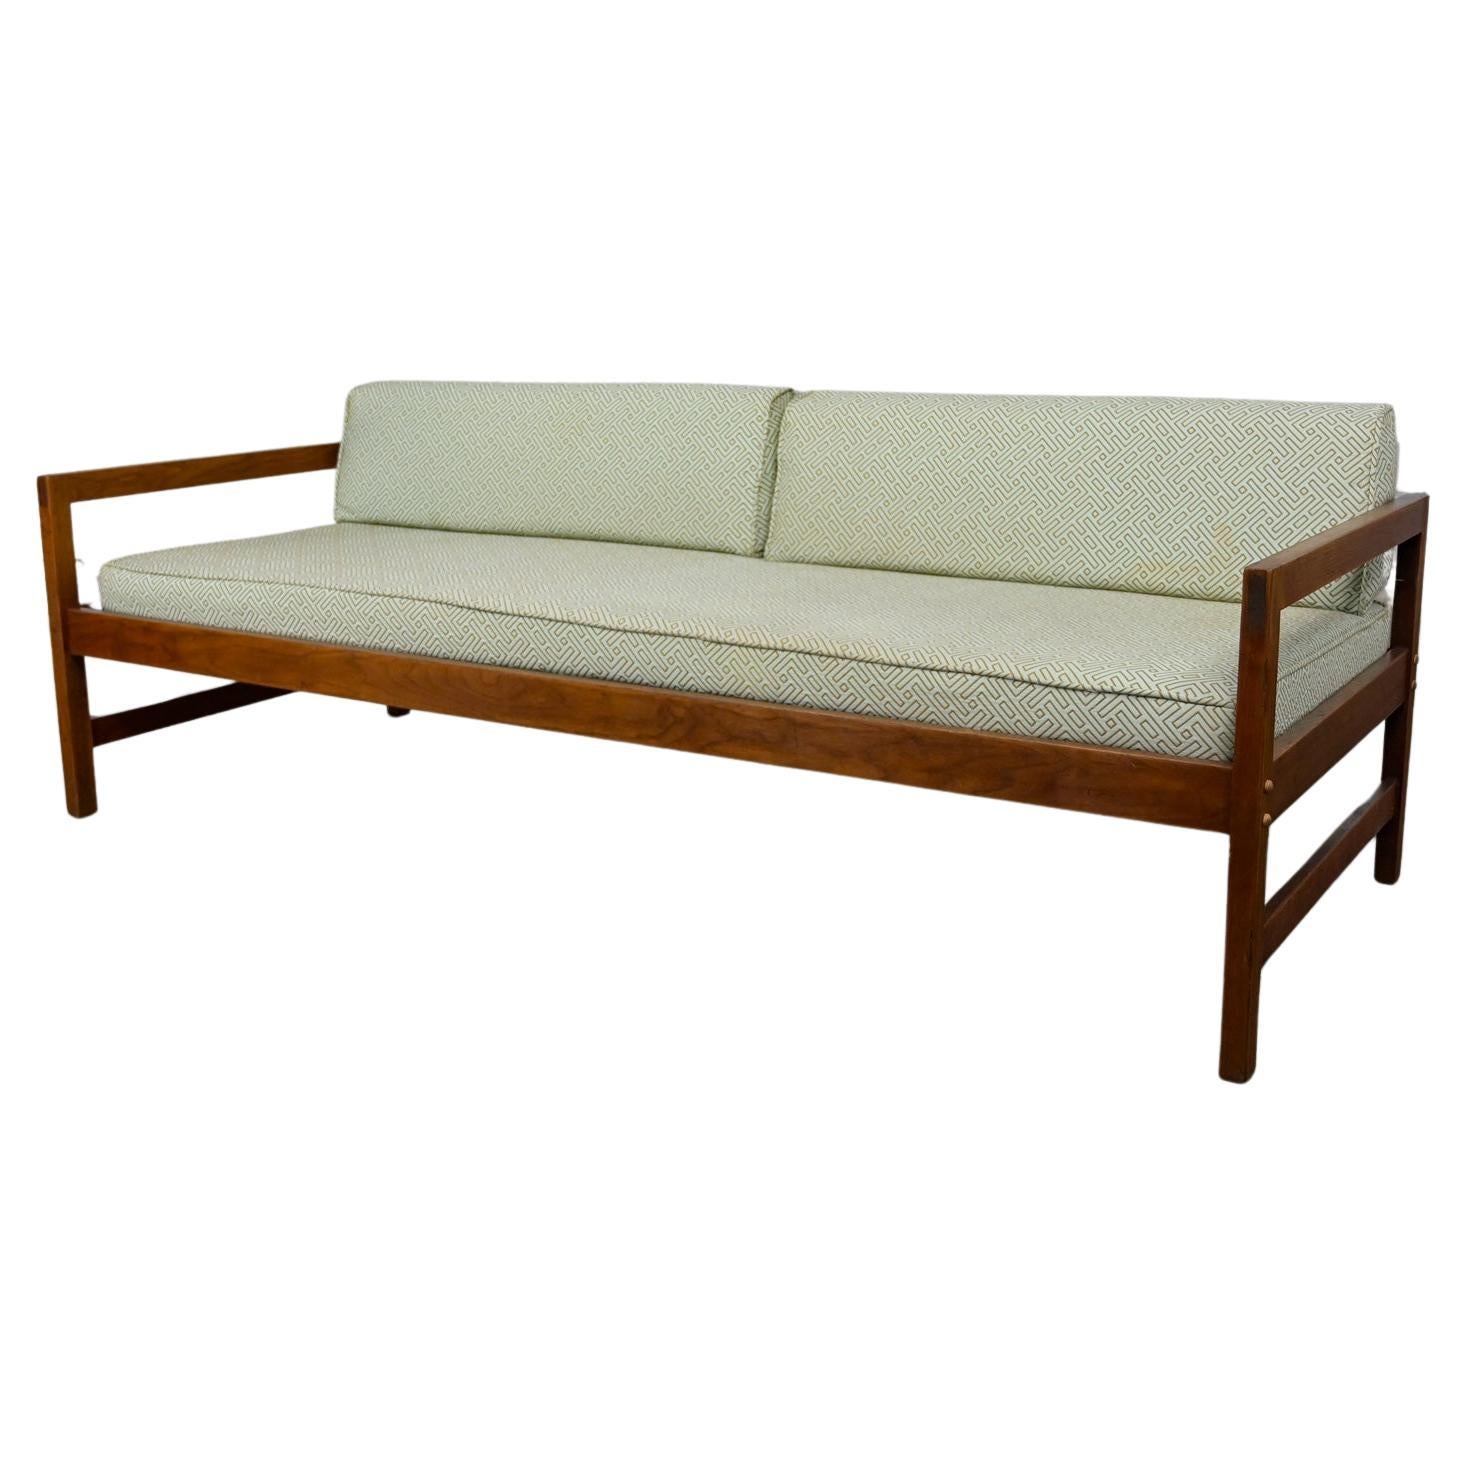 MCM Daybed Sofa Walnut Frame with Arms & Gray-Blue Upholstery & Stram Springs